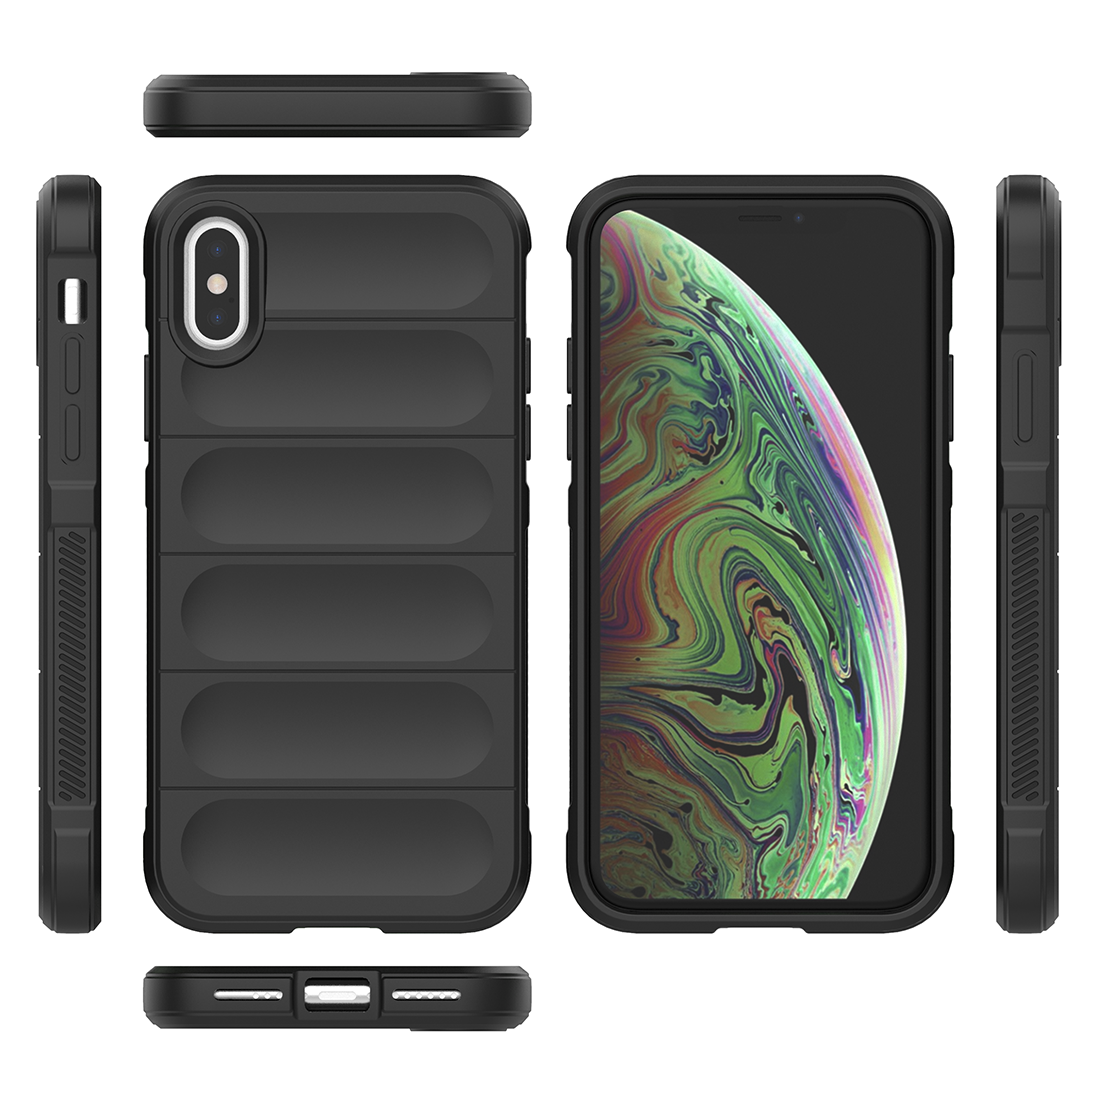 Magic Back Case Cover for Apple iPhone X / Xs